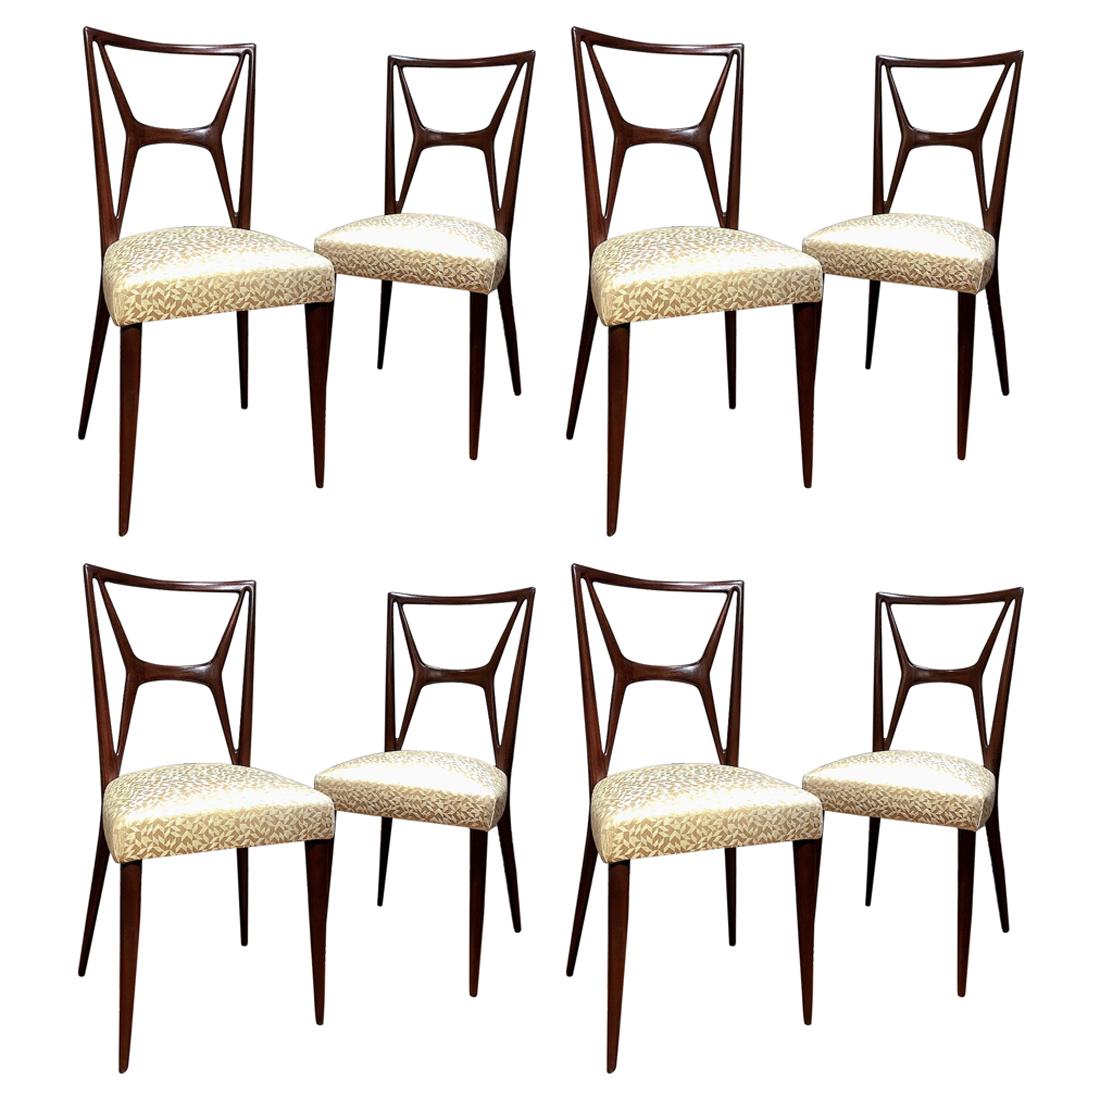 Set of 8 Vintage Chairs, Italy, 1970s